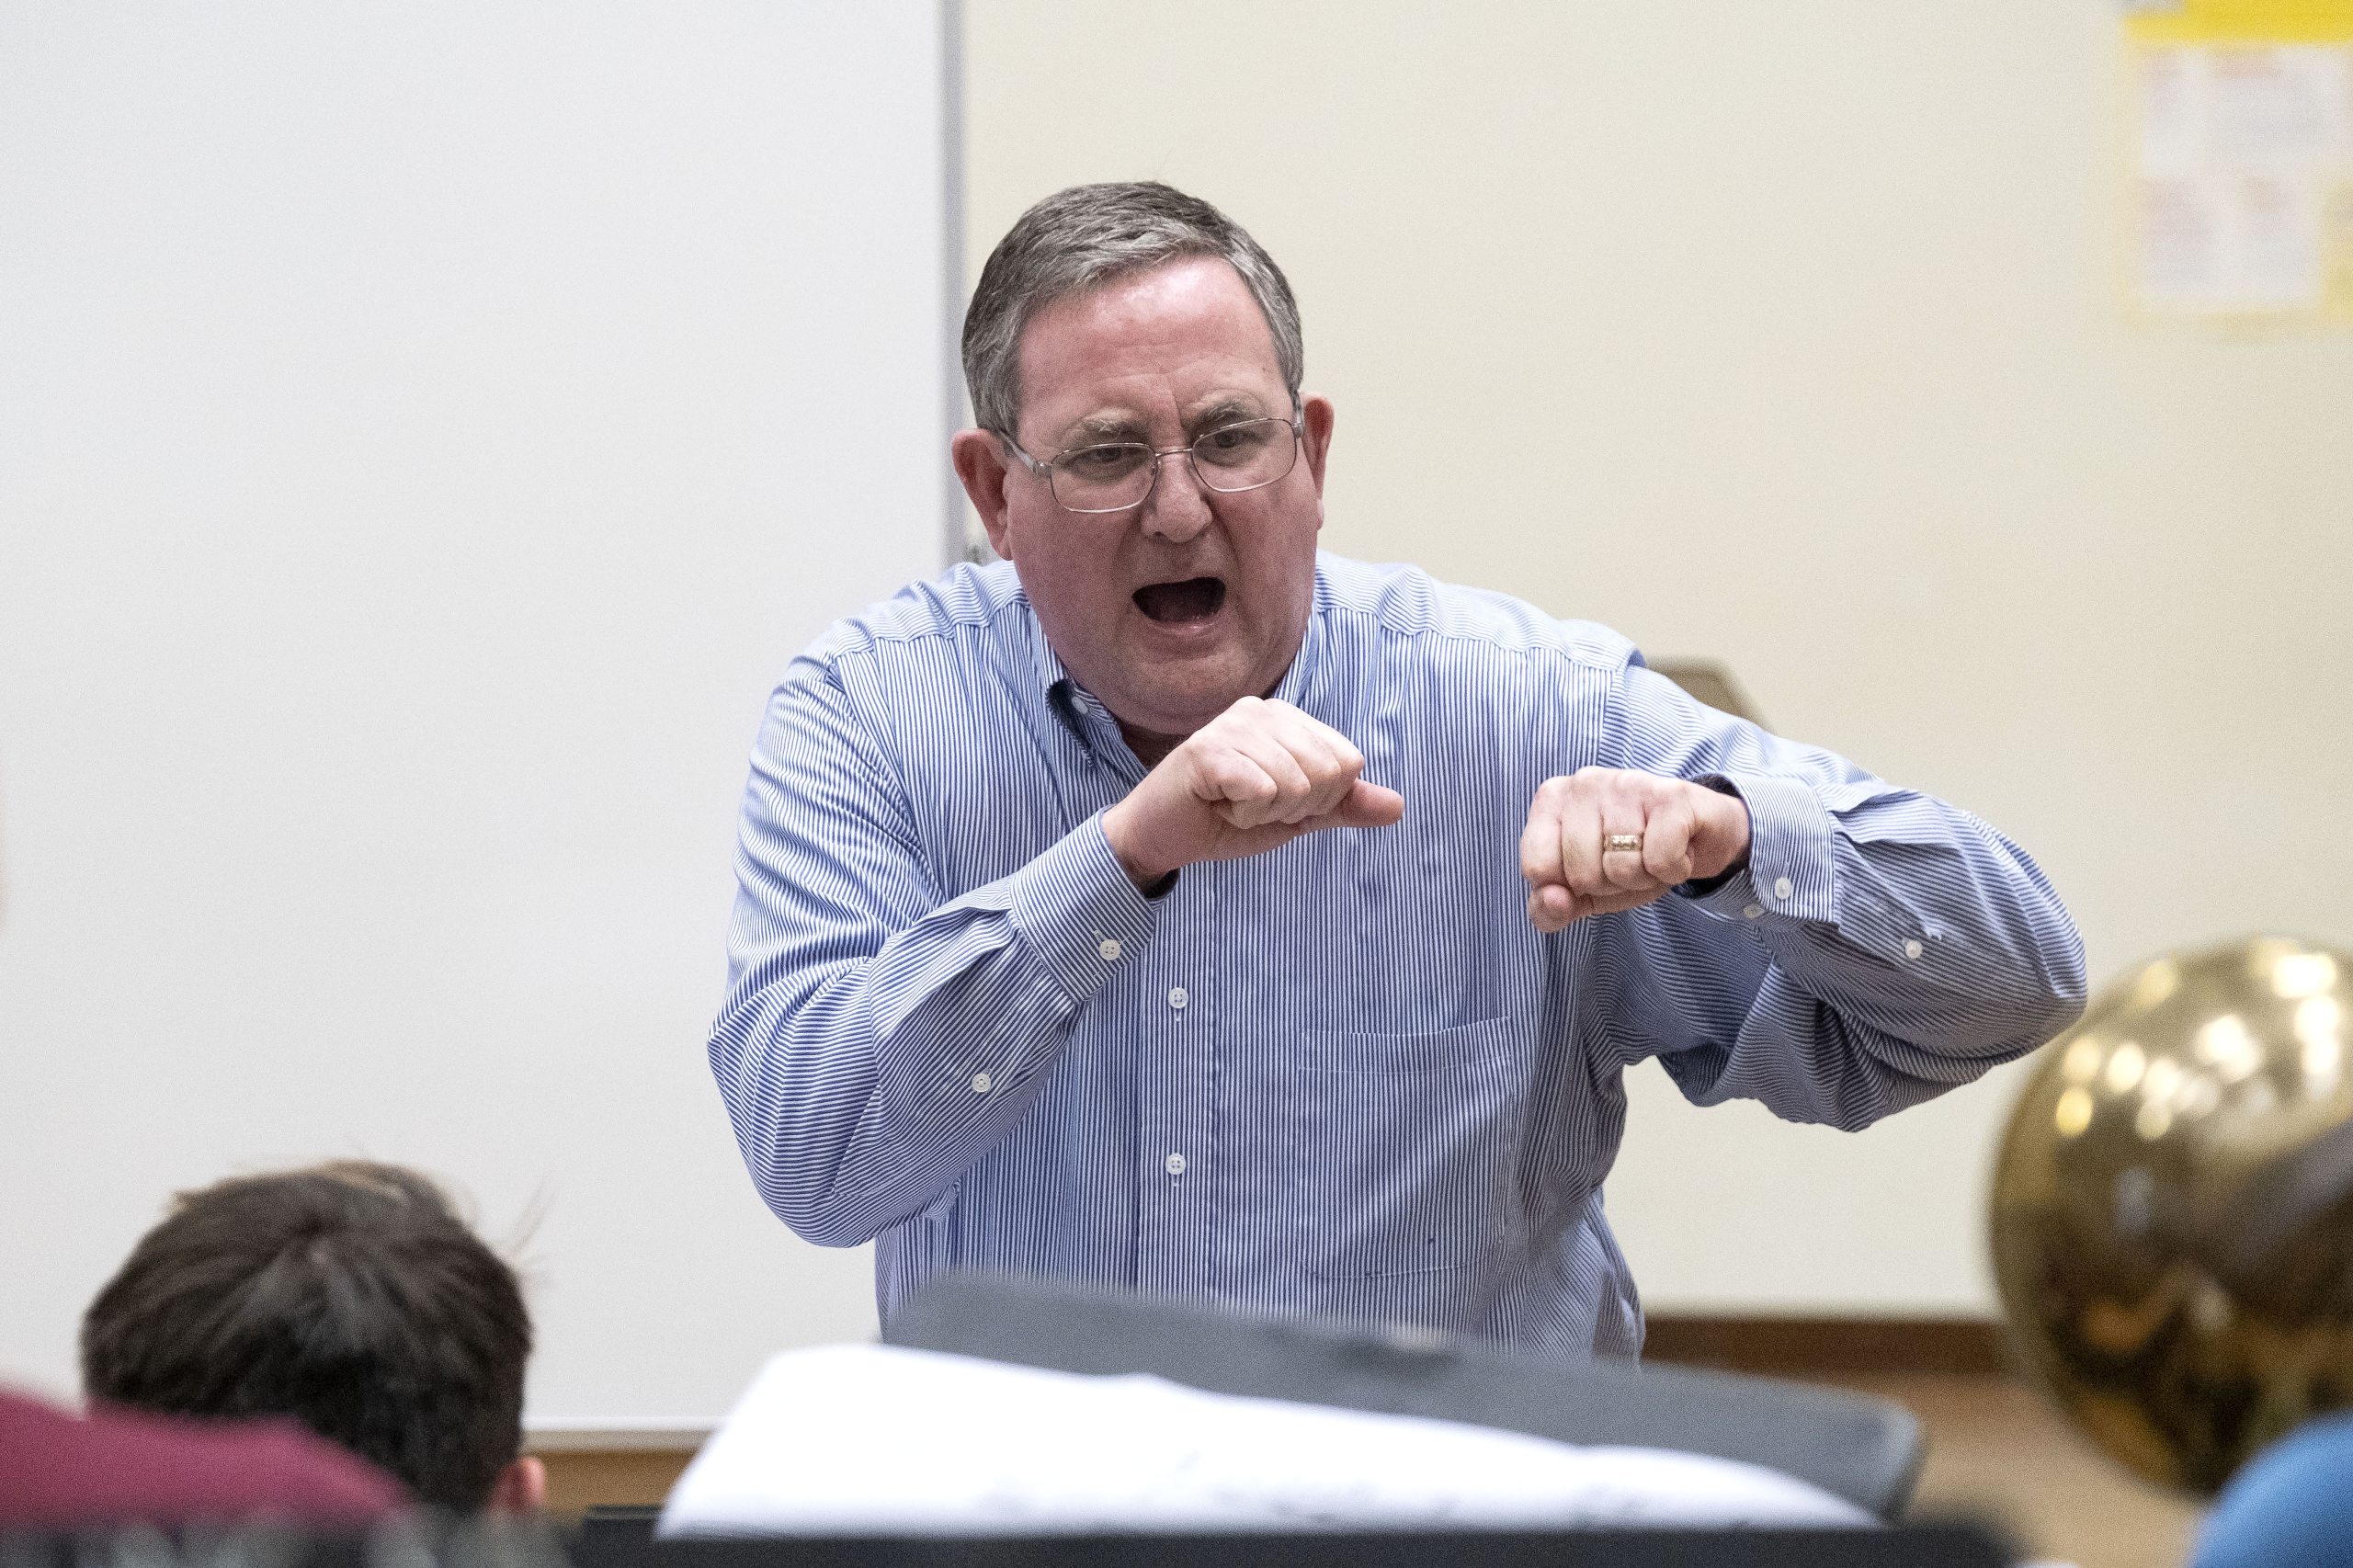 Jim Ketch punches with both hands while directing a rehearsal of the UNC Jazz Ensemble.